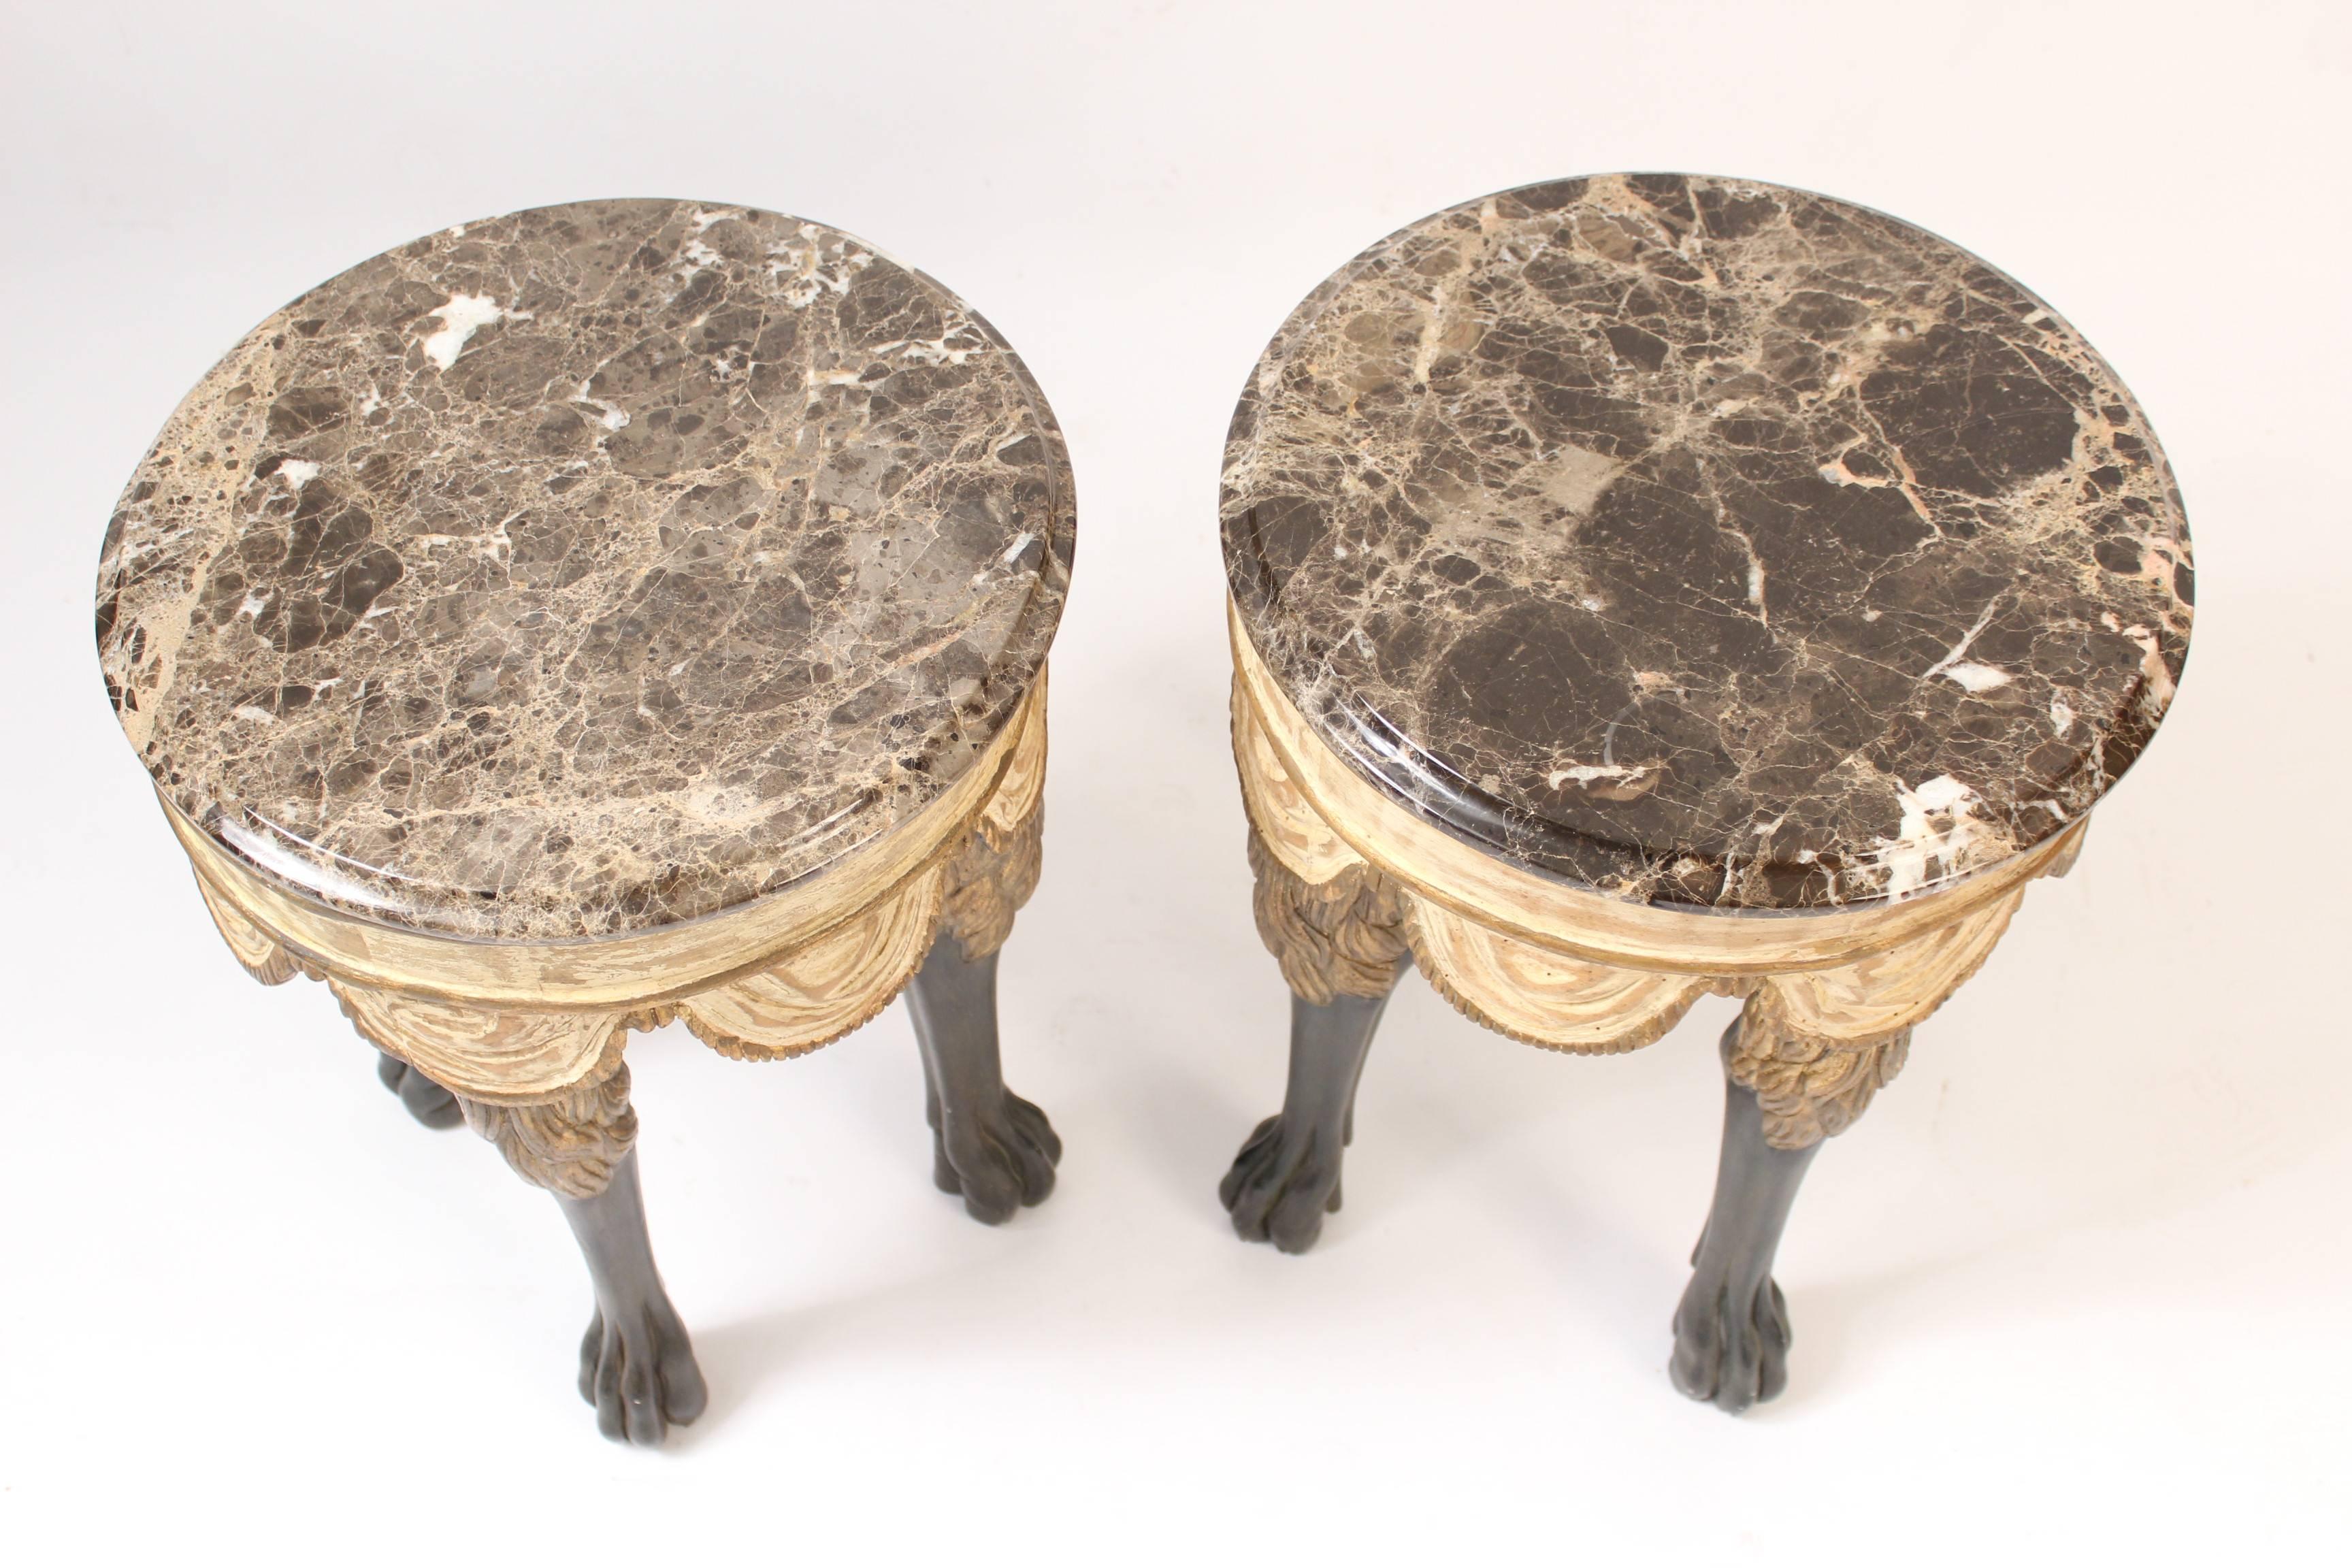 Pair of continental neoclassical style occasional tables with wood carved swag form aprons, gilt and black painted legs and marble tops, made circa late 20th century.